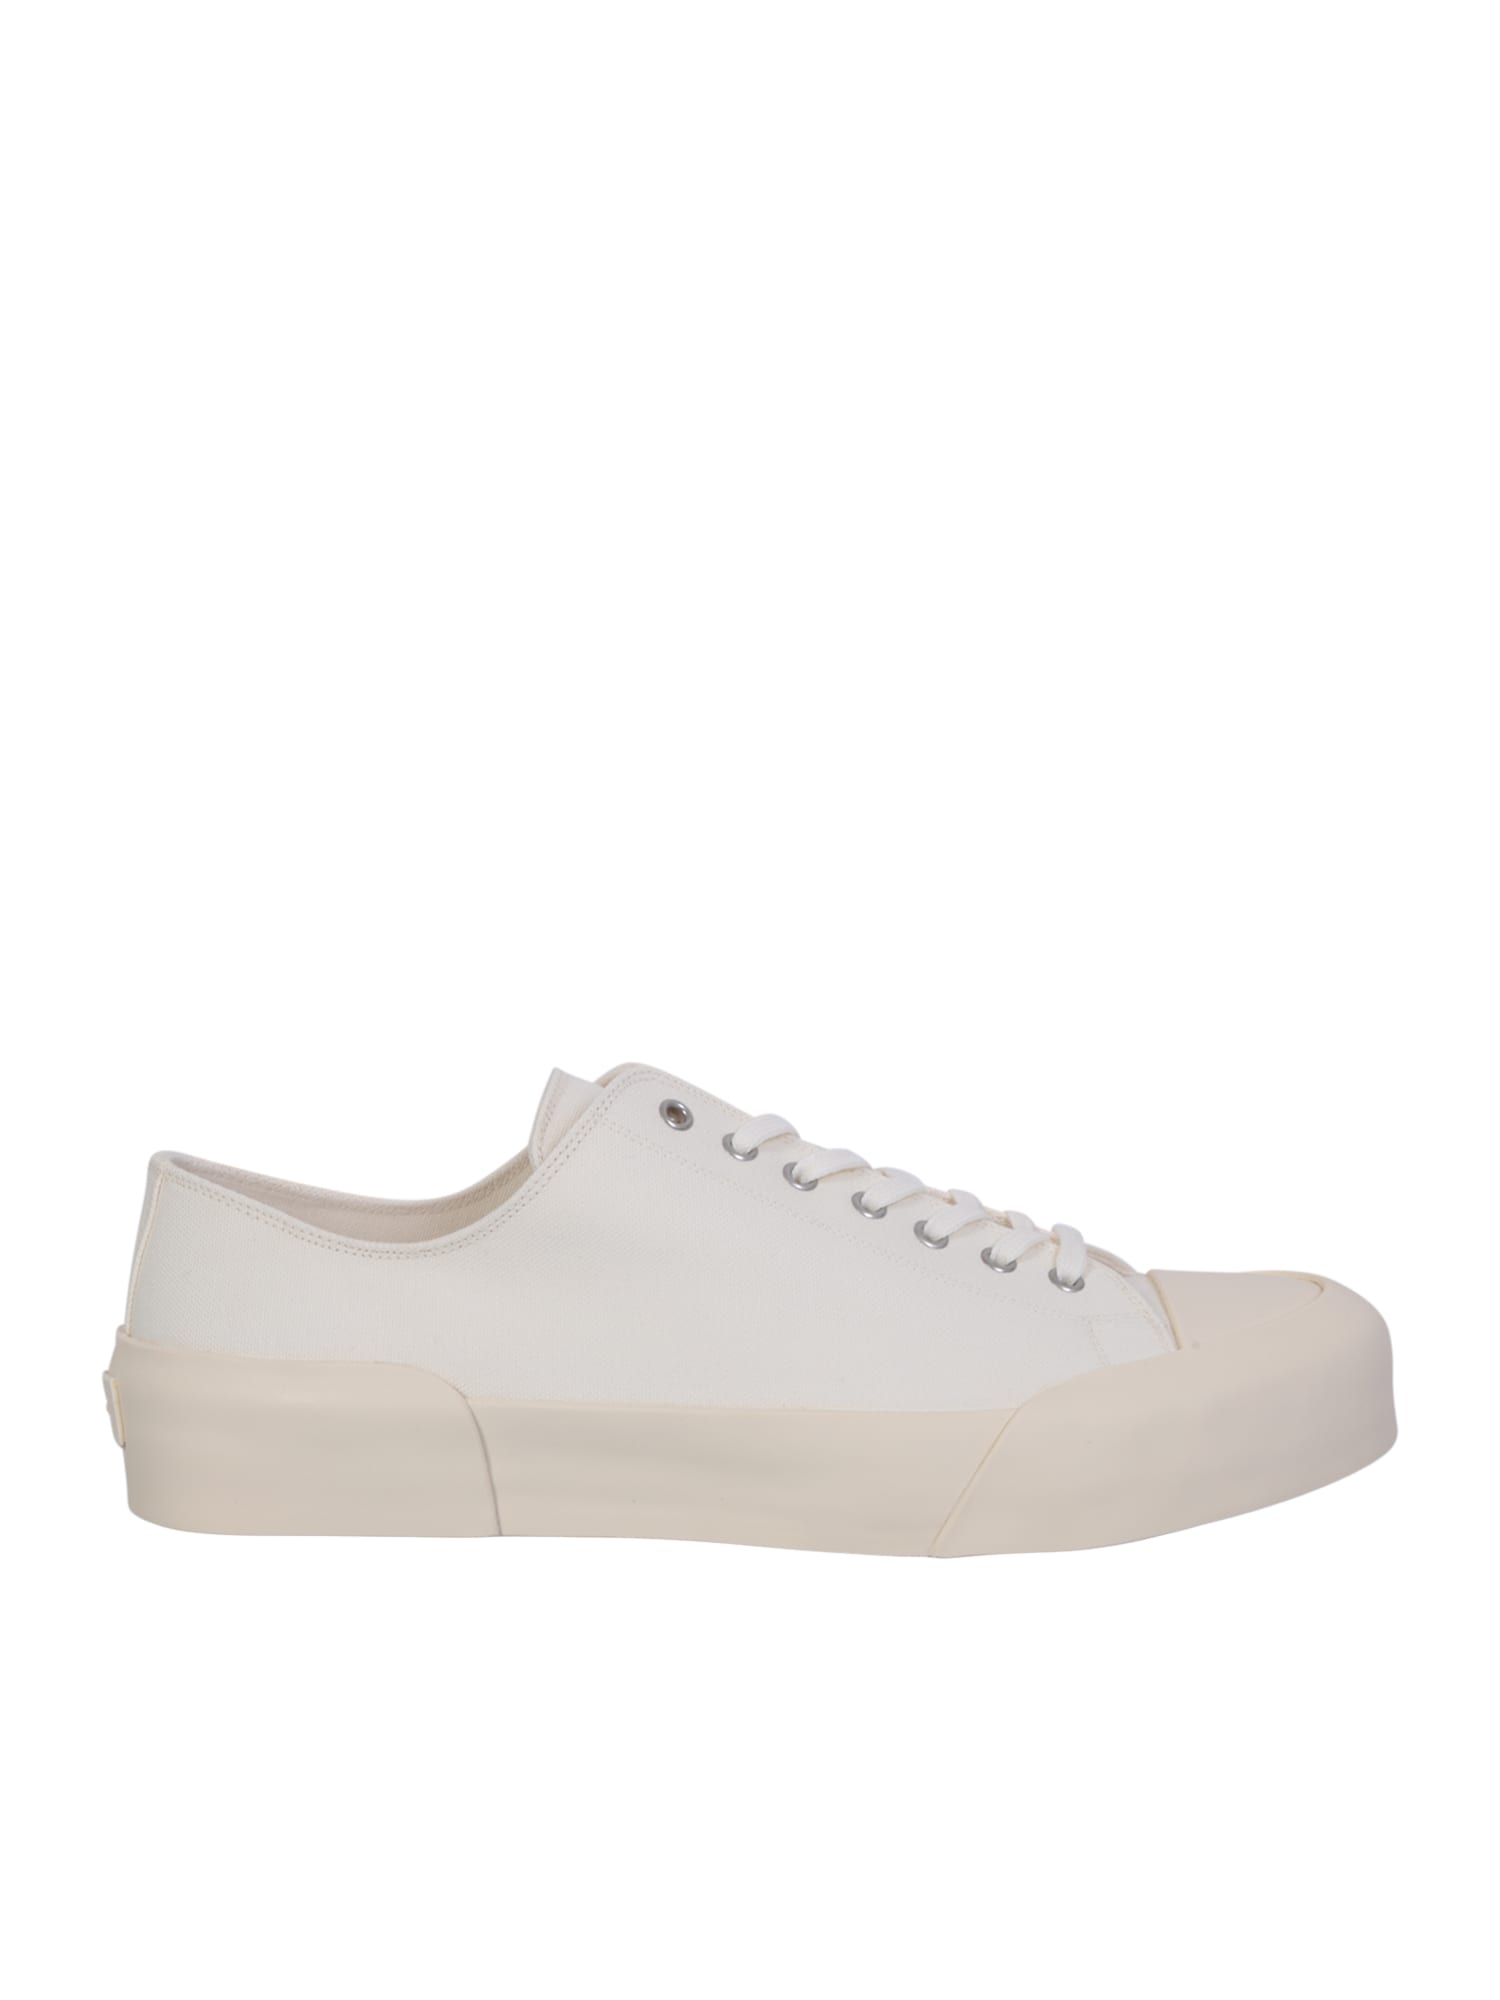 Jil Sander Lace-up Low White Sneakers